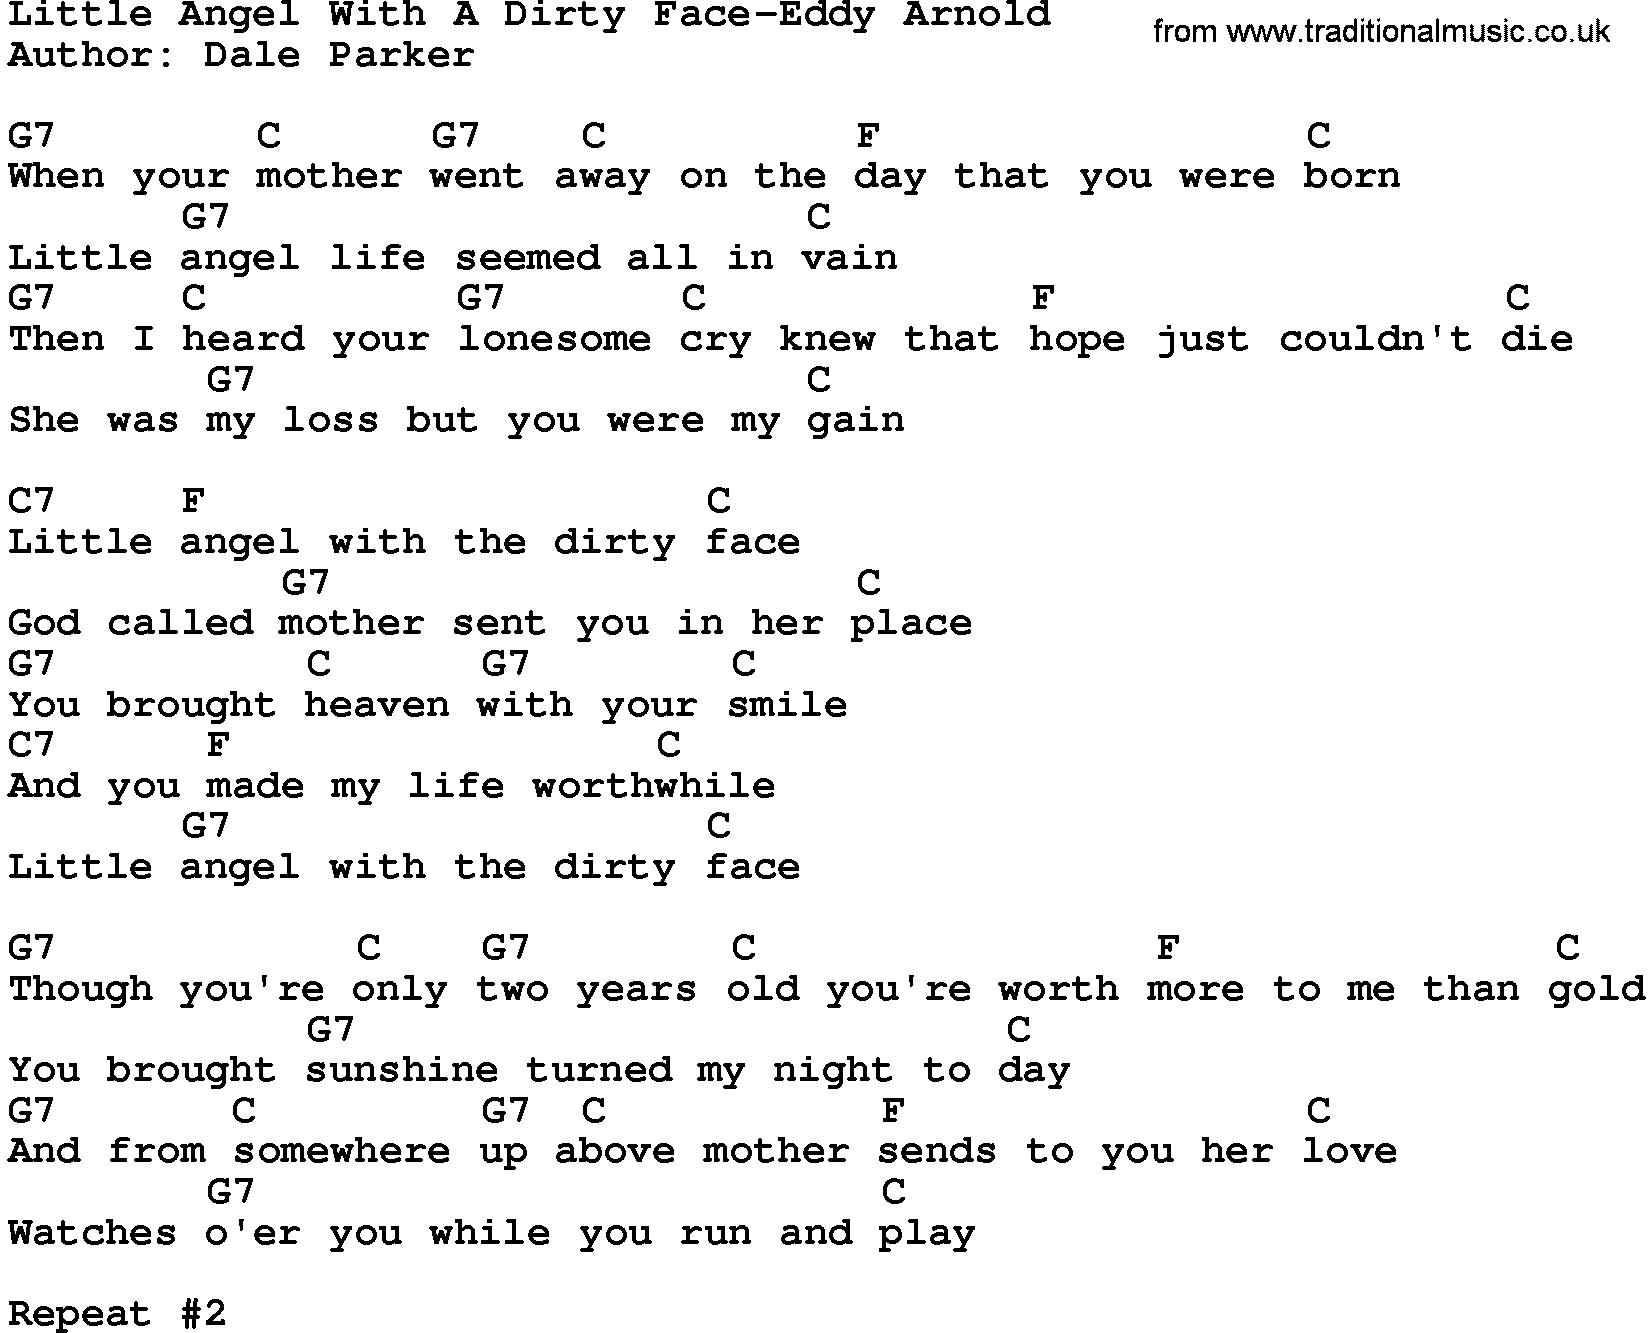 Country music song: Little Angel With A Dirty Face-Eddy Arnold lyrics and chords